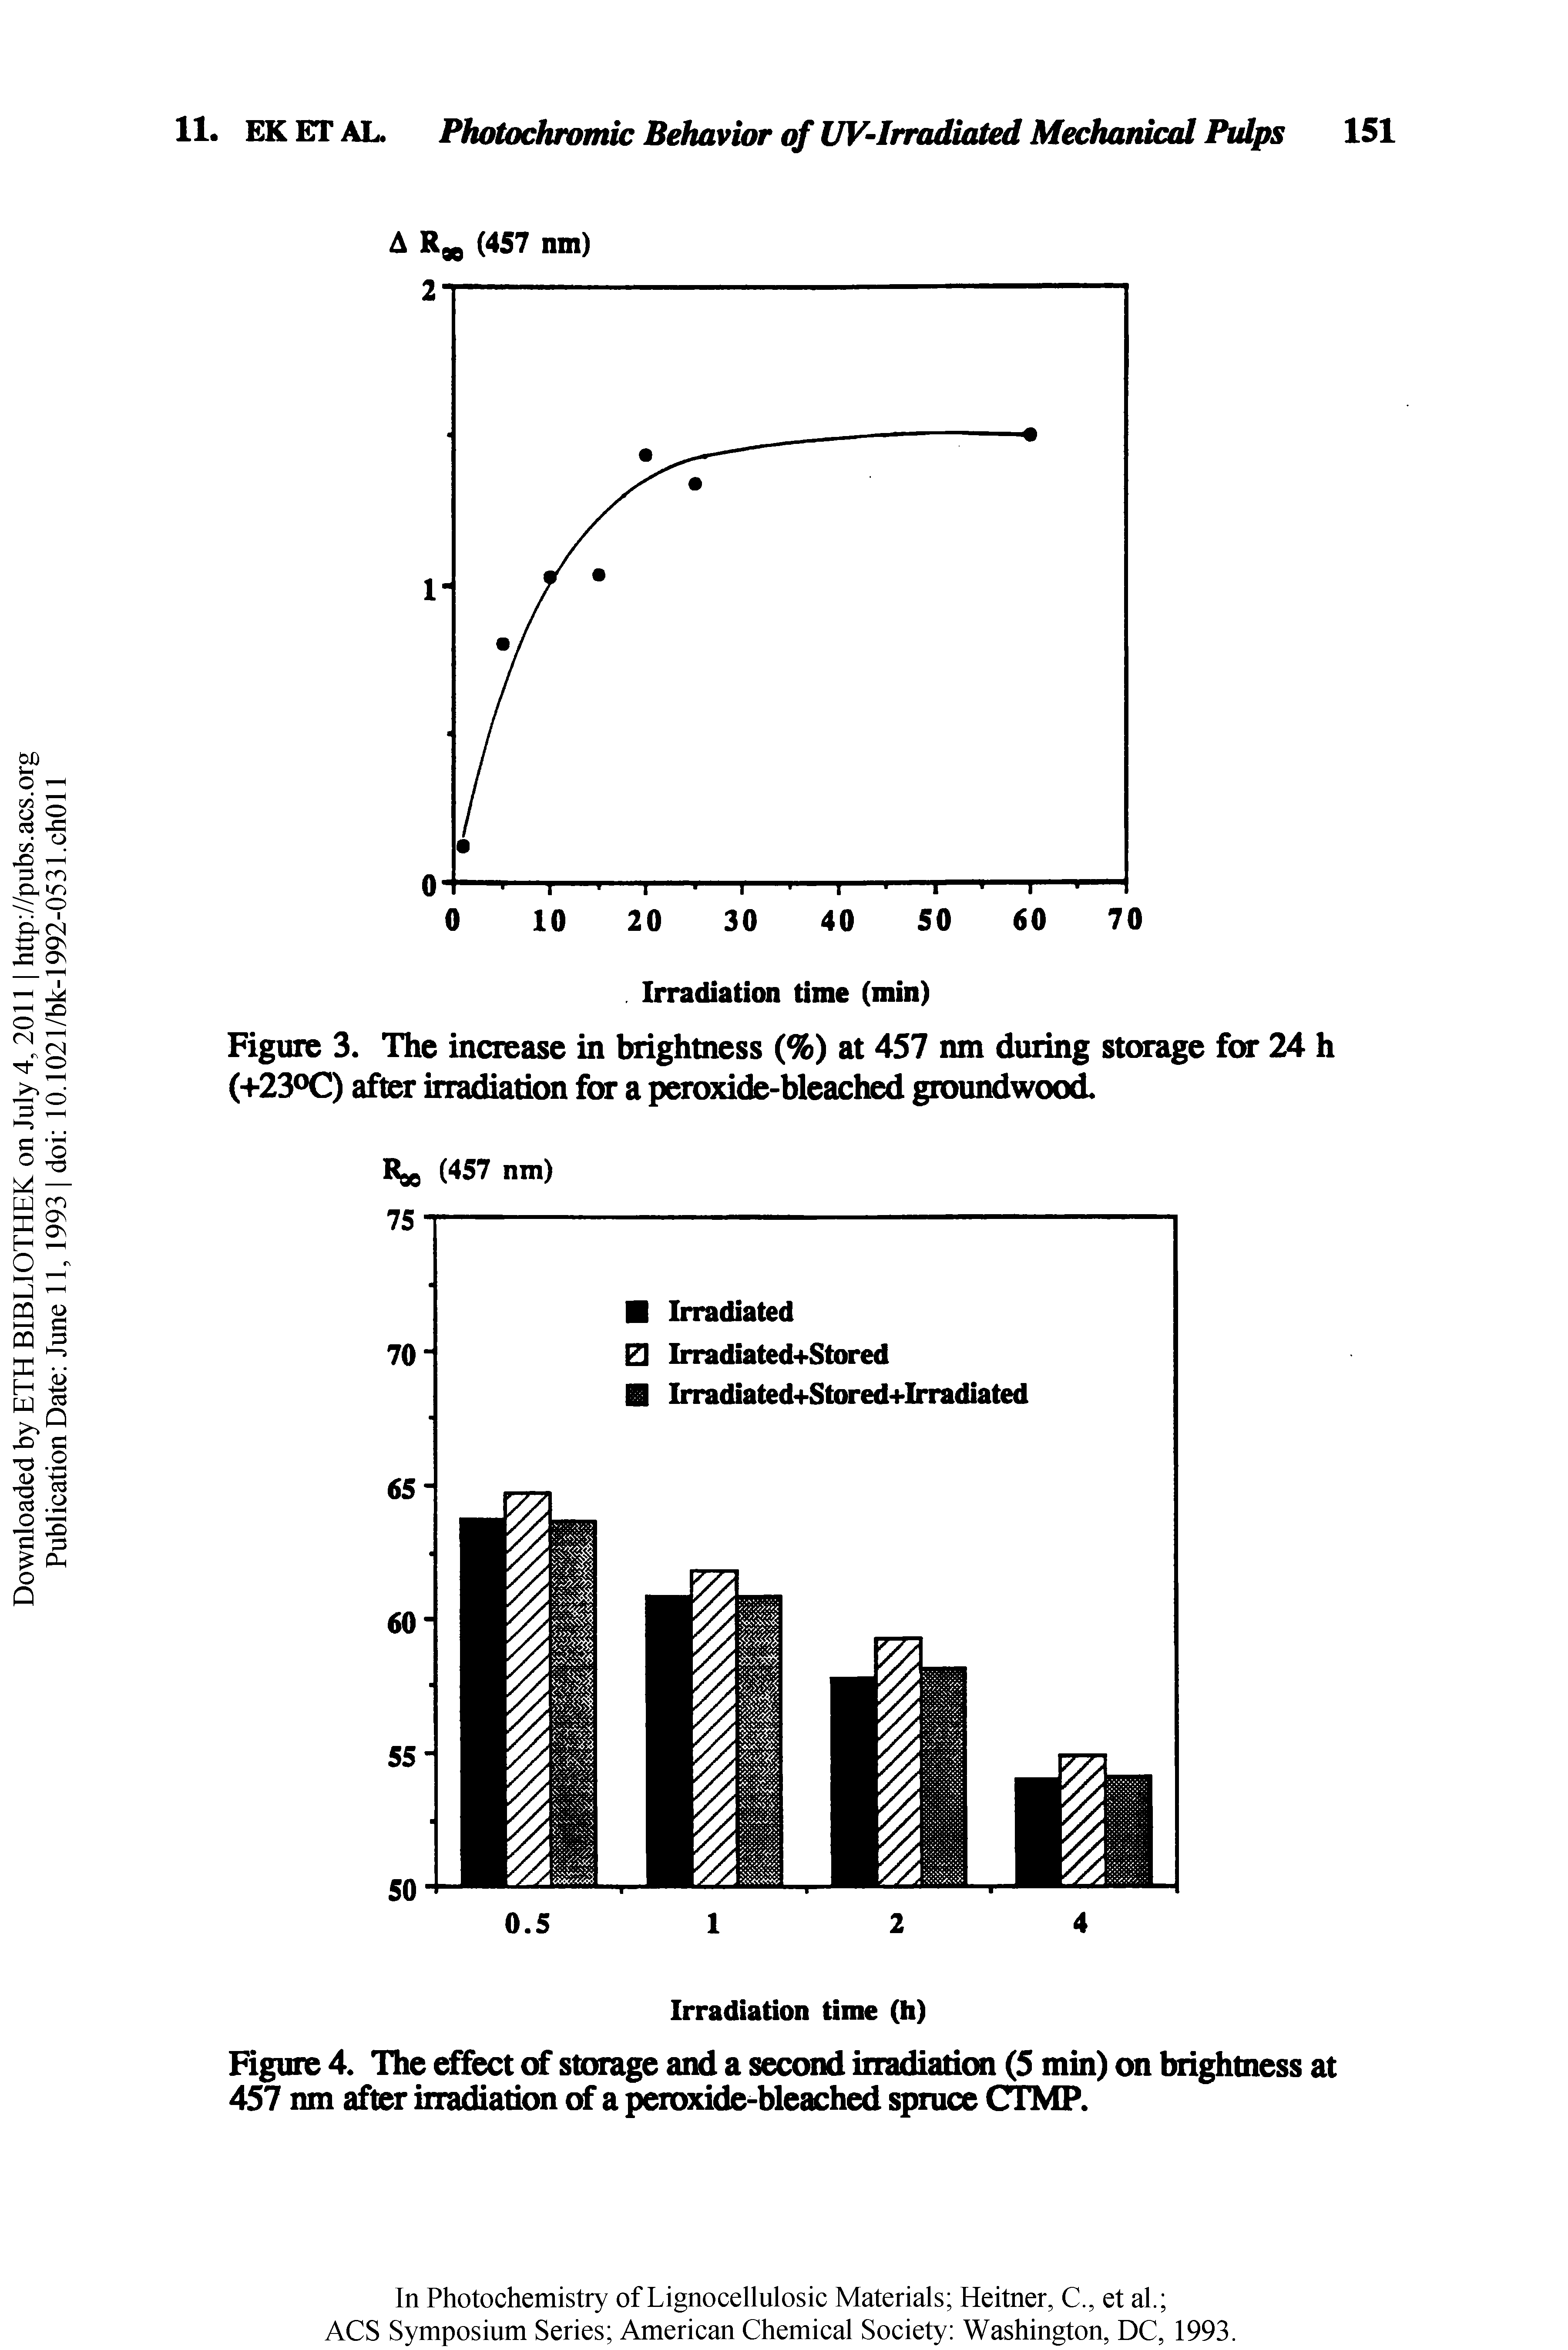 Figure 3. The increase in brightness (%) at 457 nm during storage for 24 h (+23°C) after irradiation for a peroxide-bleached groundwood.